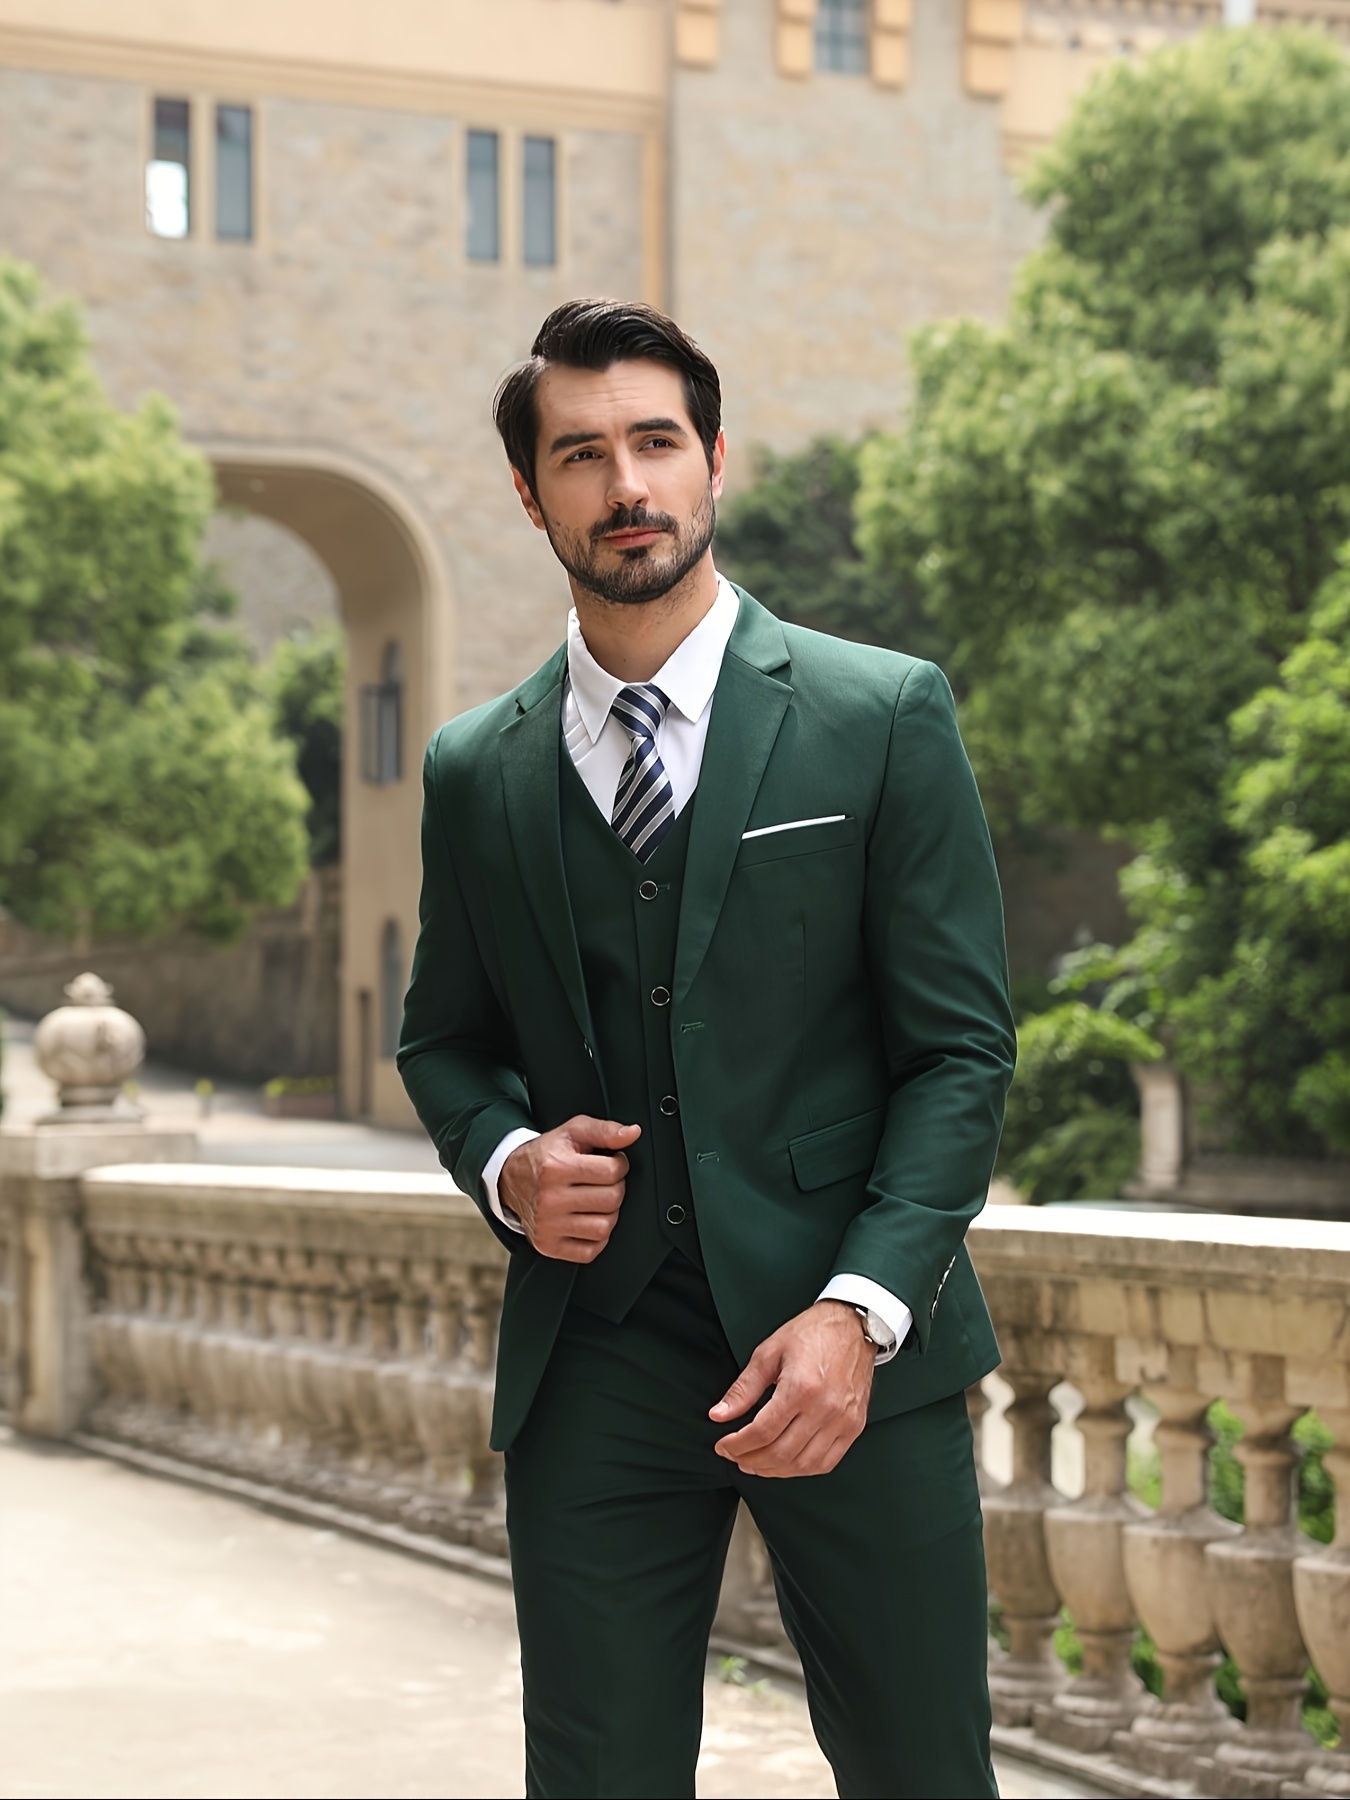 Men's Suit Separates: Build a Formal Look for any Event